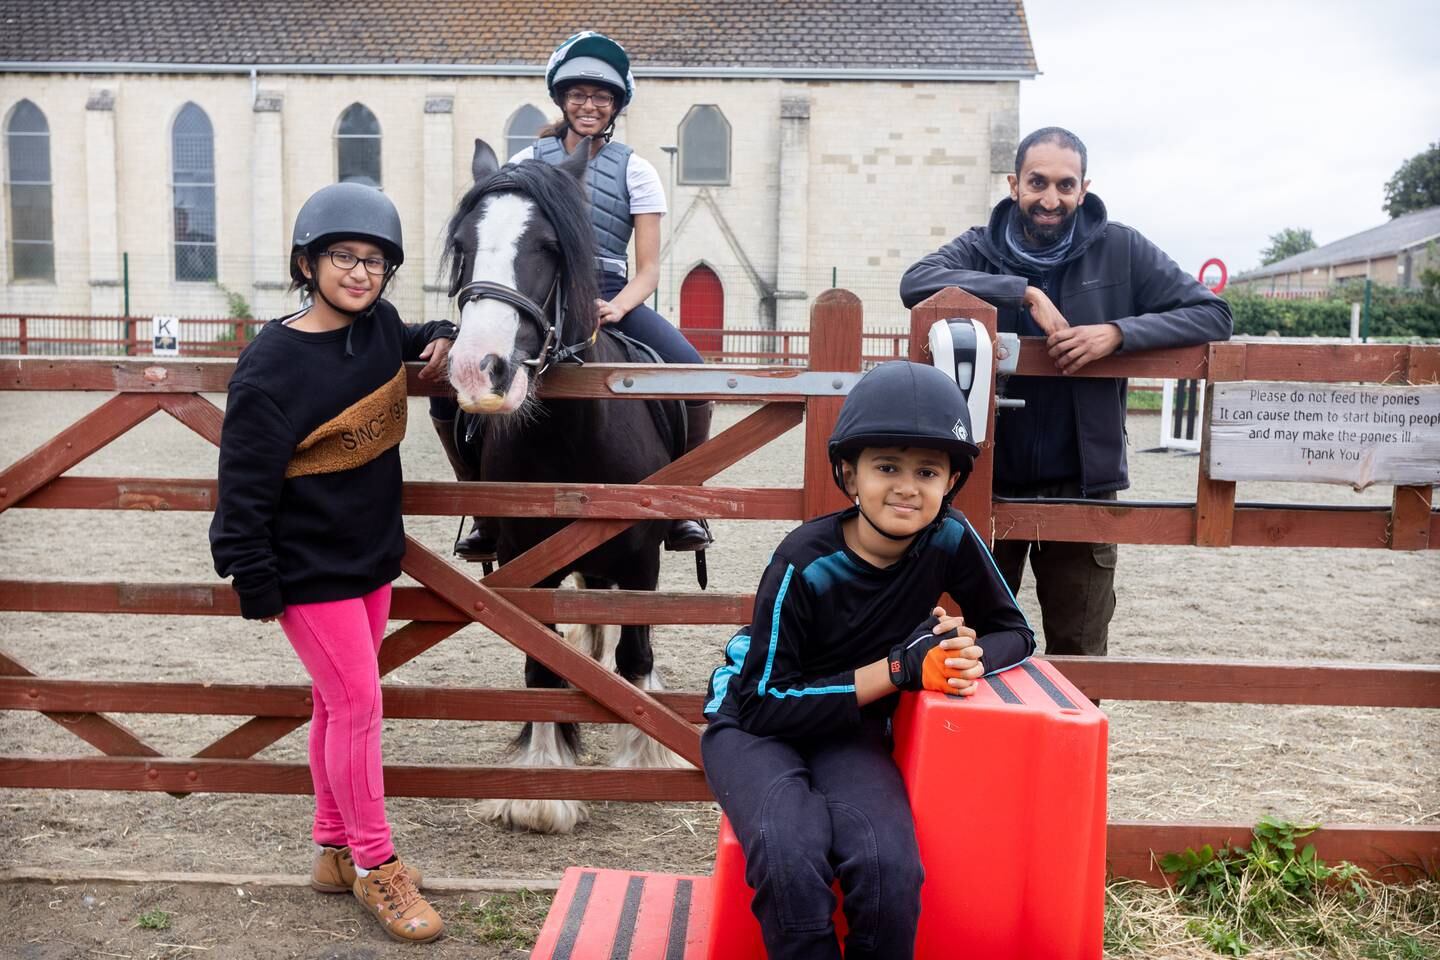 Aamilah Aswat, 15, sits on a horse along with, left to right, Hibbah Randaera, 11, Ishaaq Mohamedy, 13, and Imran Atcha. Mark Chilvers / The National